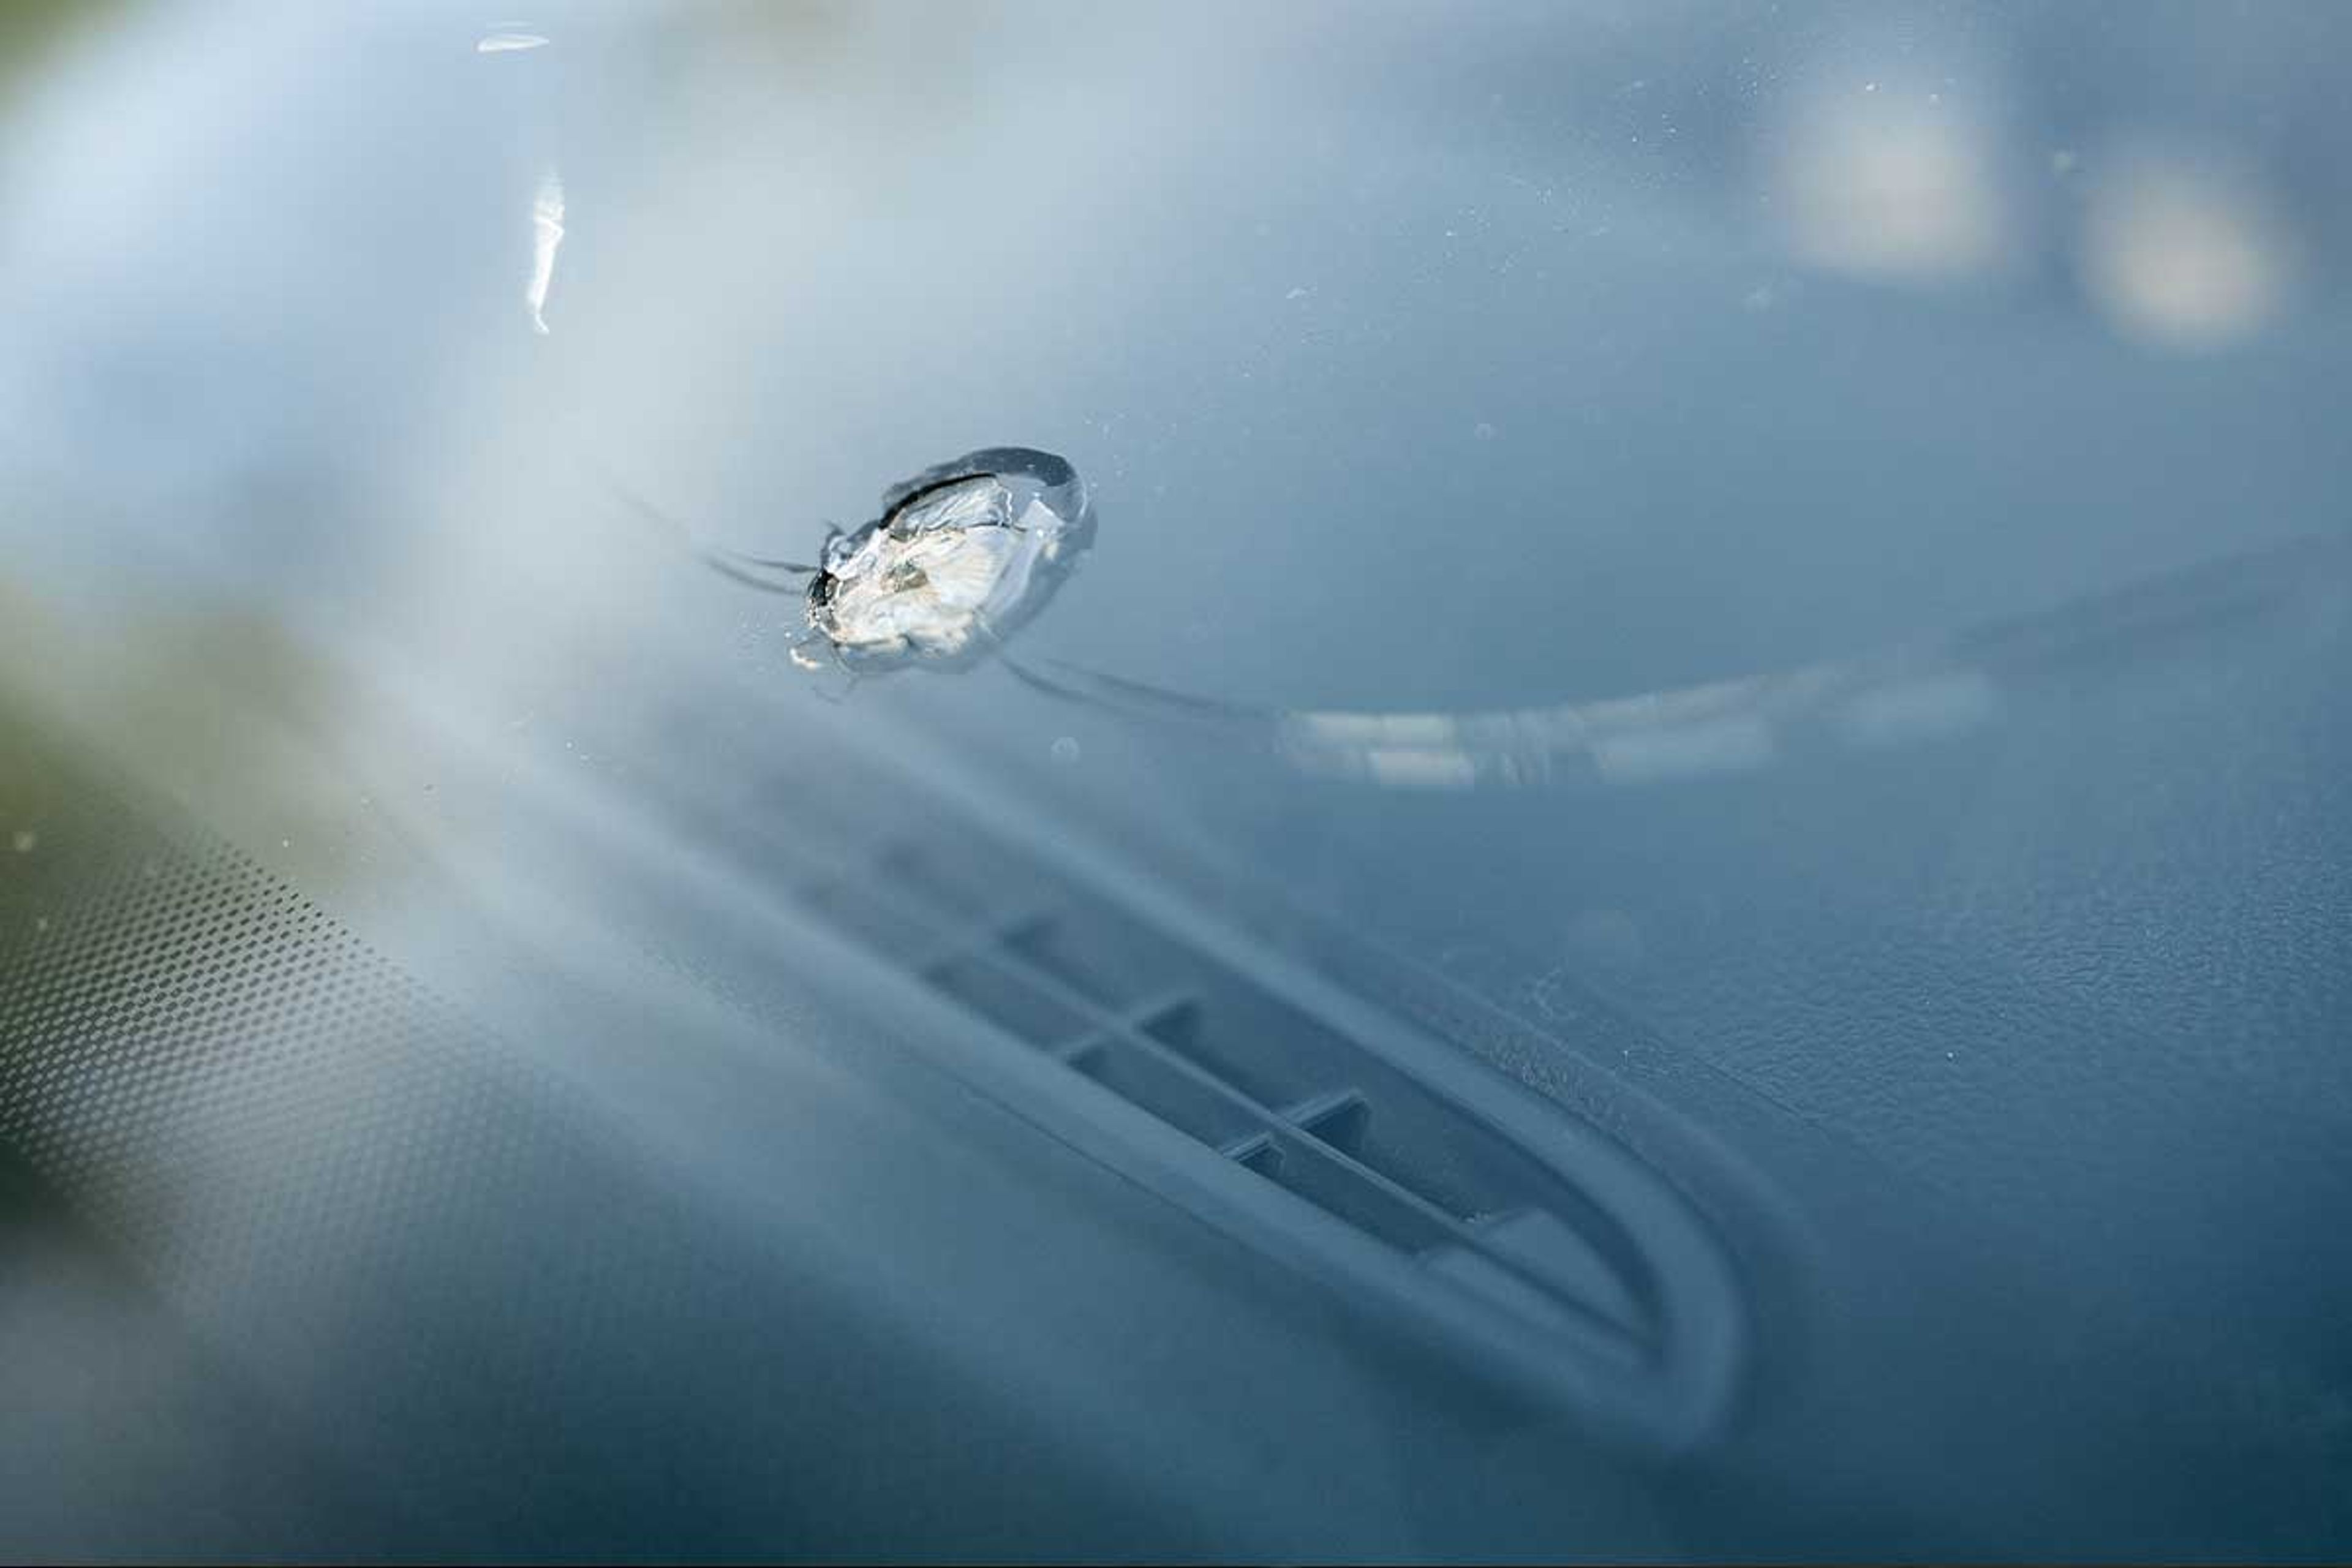 Broken windshield with cracks and shattered glass on a car parked on the side of the road in Iceland